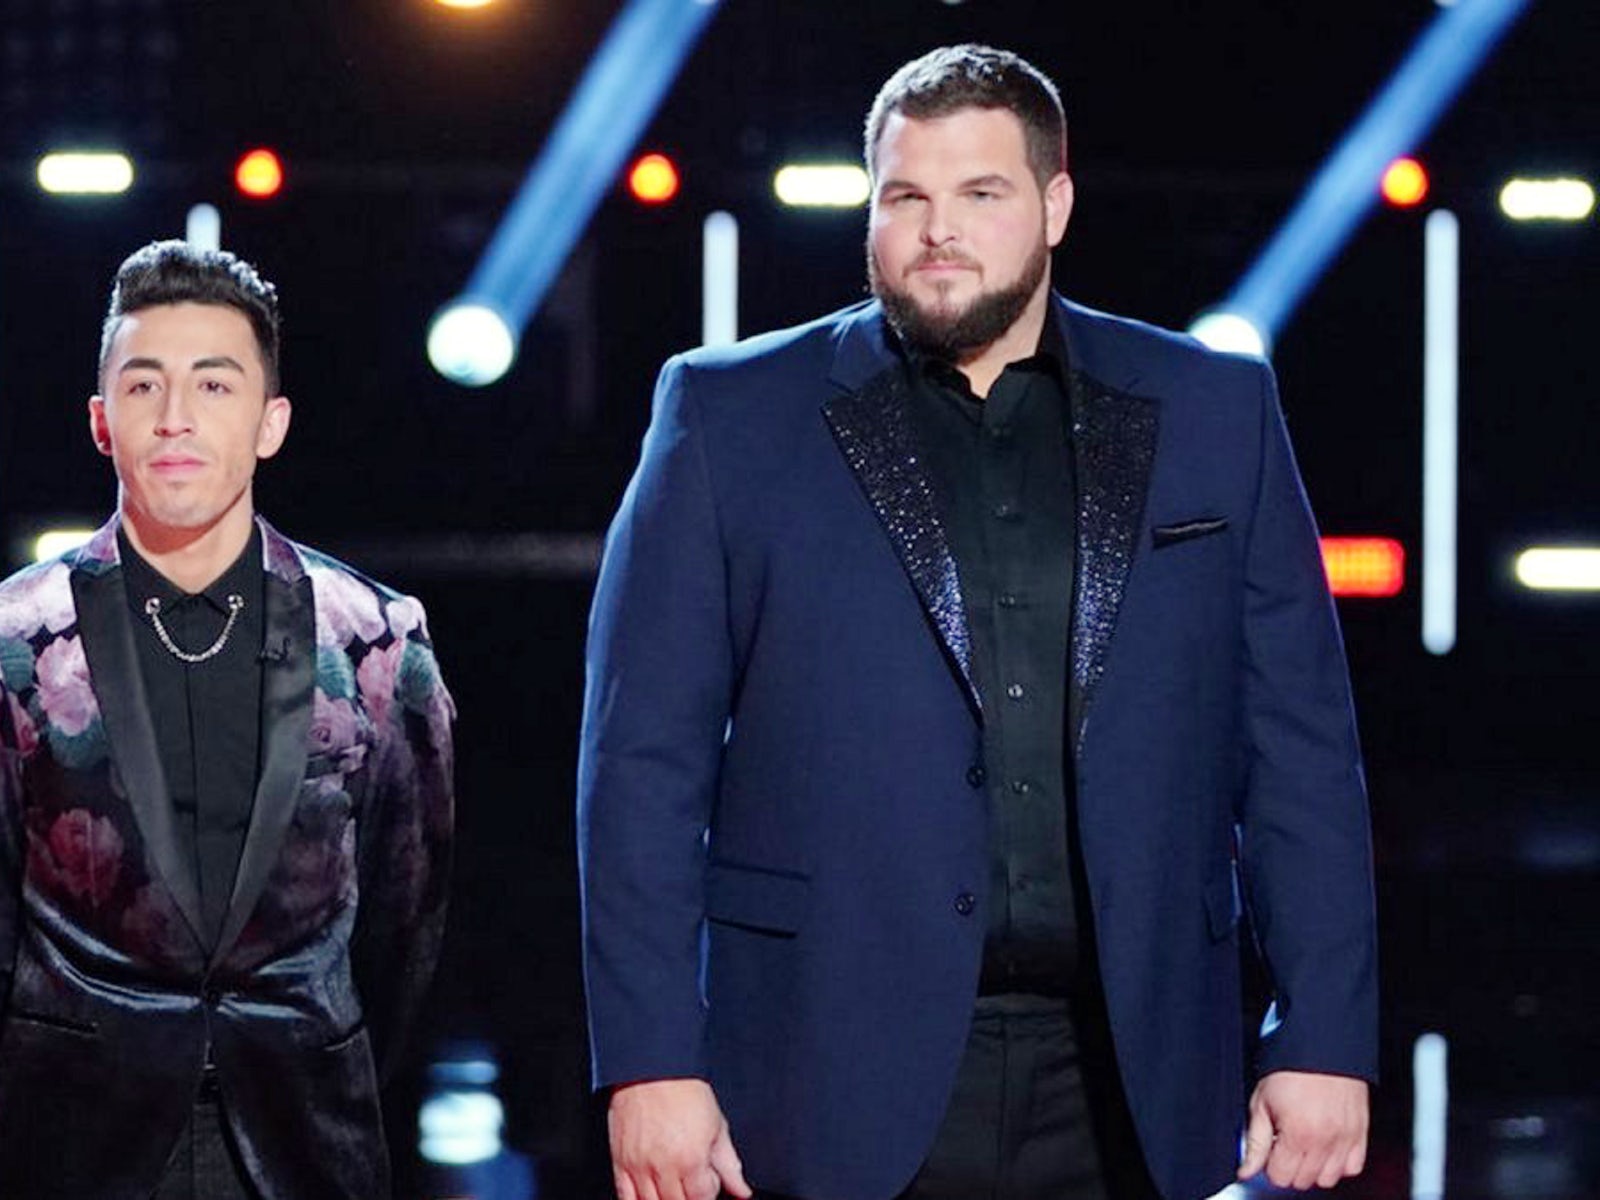 'The Voice' crowns Jake Hoot winner over runner-up Ricky Duran in Season 17 finale ...1600 x 1200